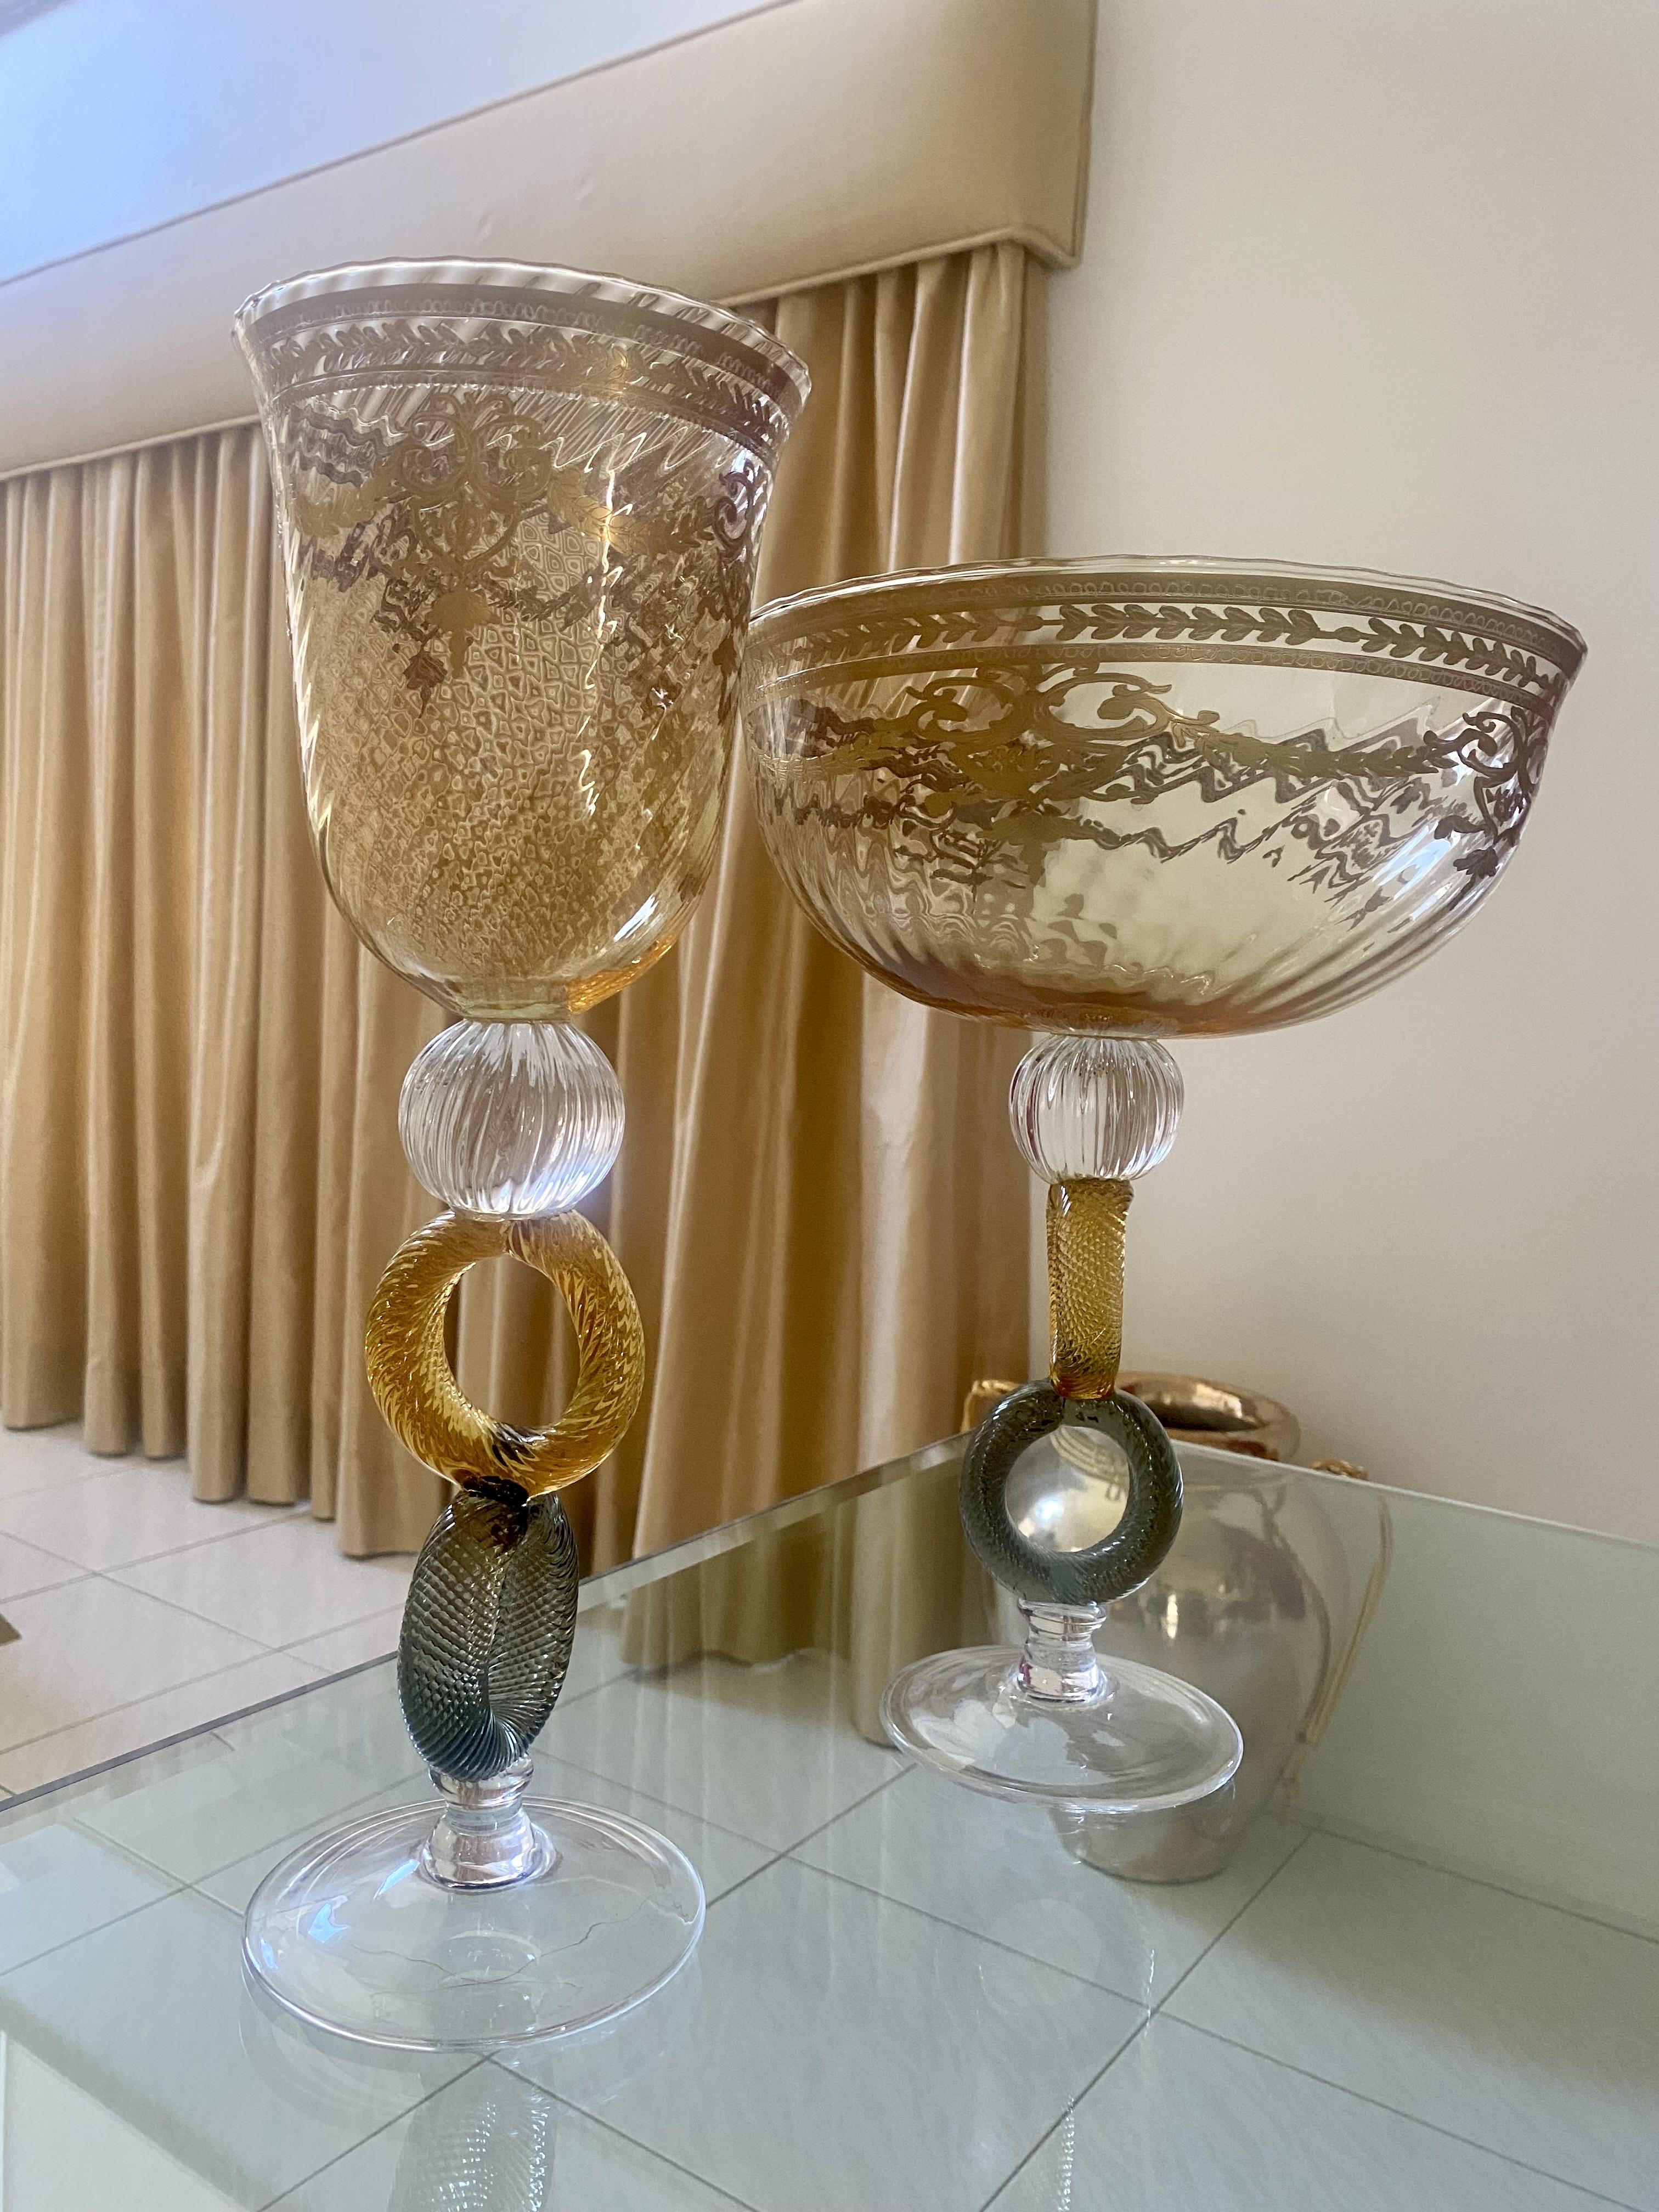 Pair of Italian Mid-Century Venetian Glass Art with Gold Trim For Sale 13